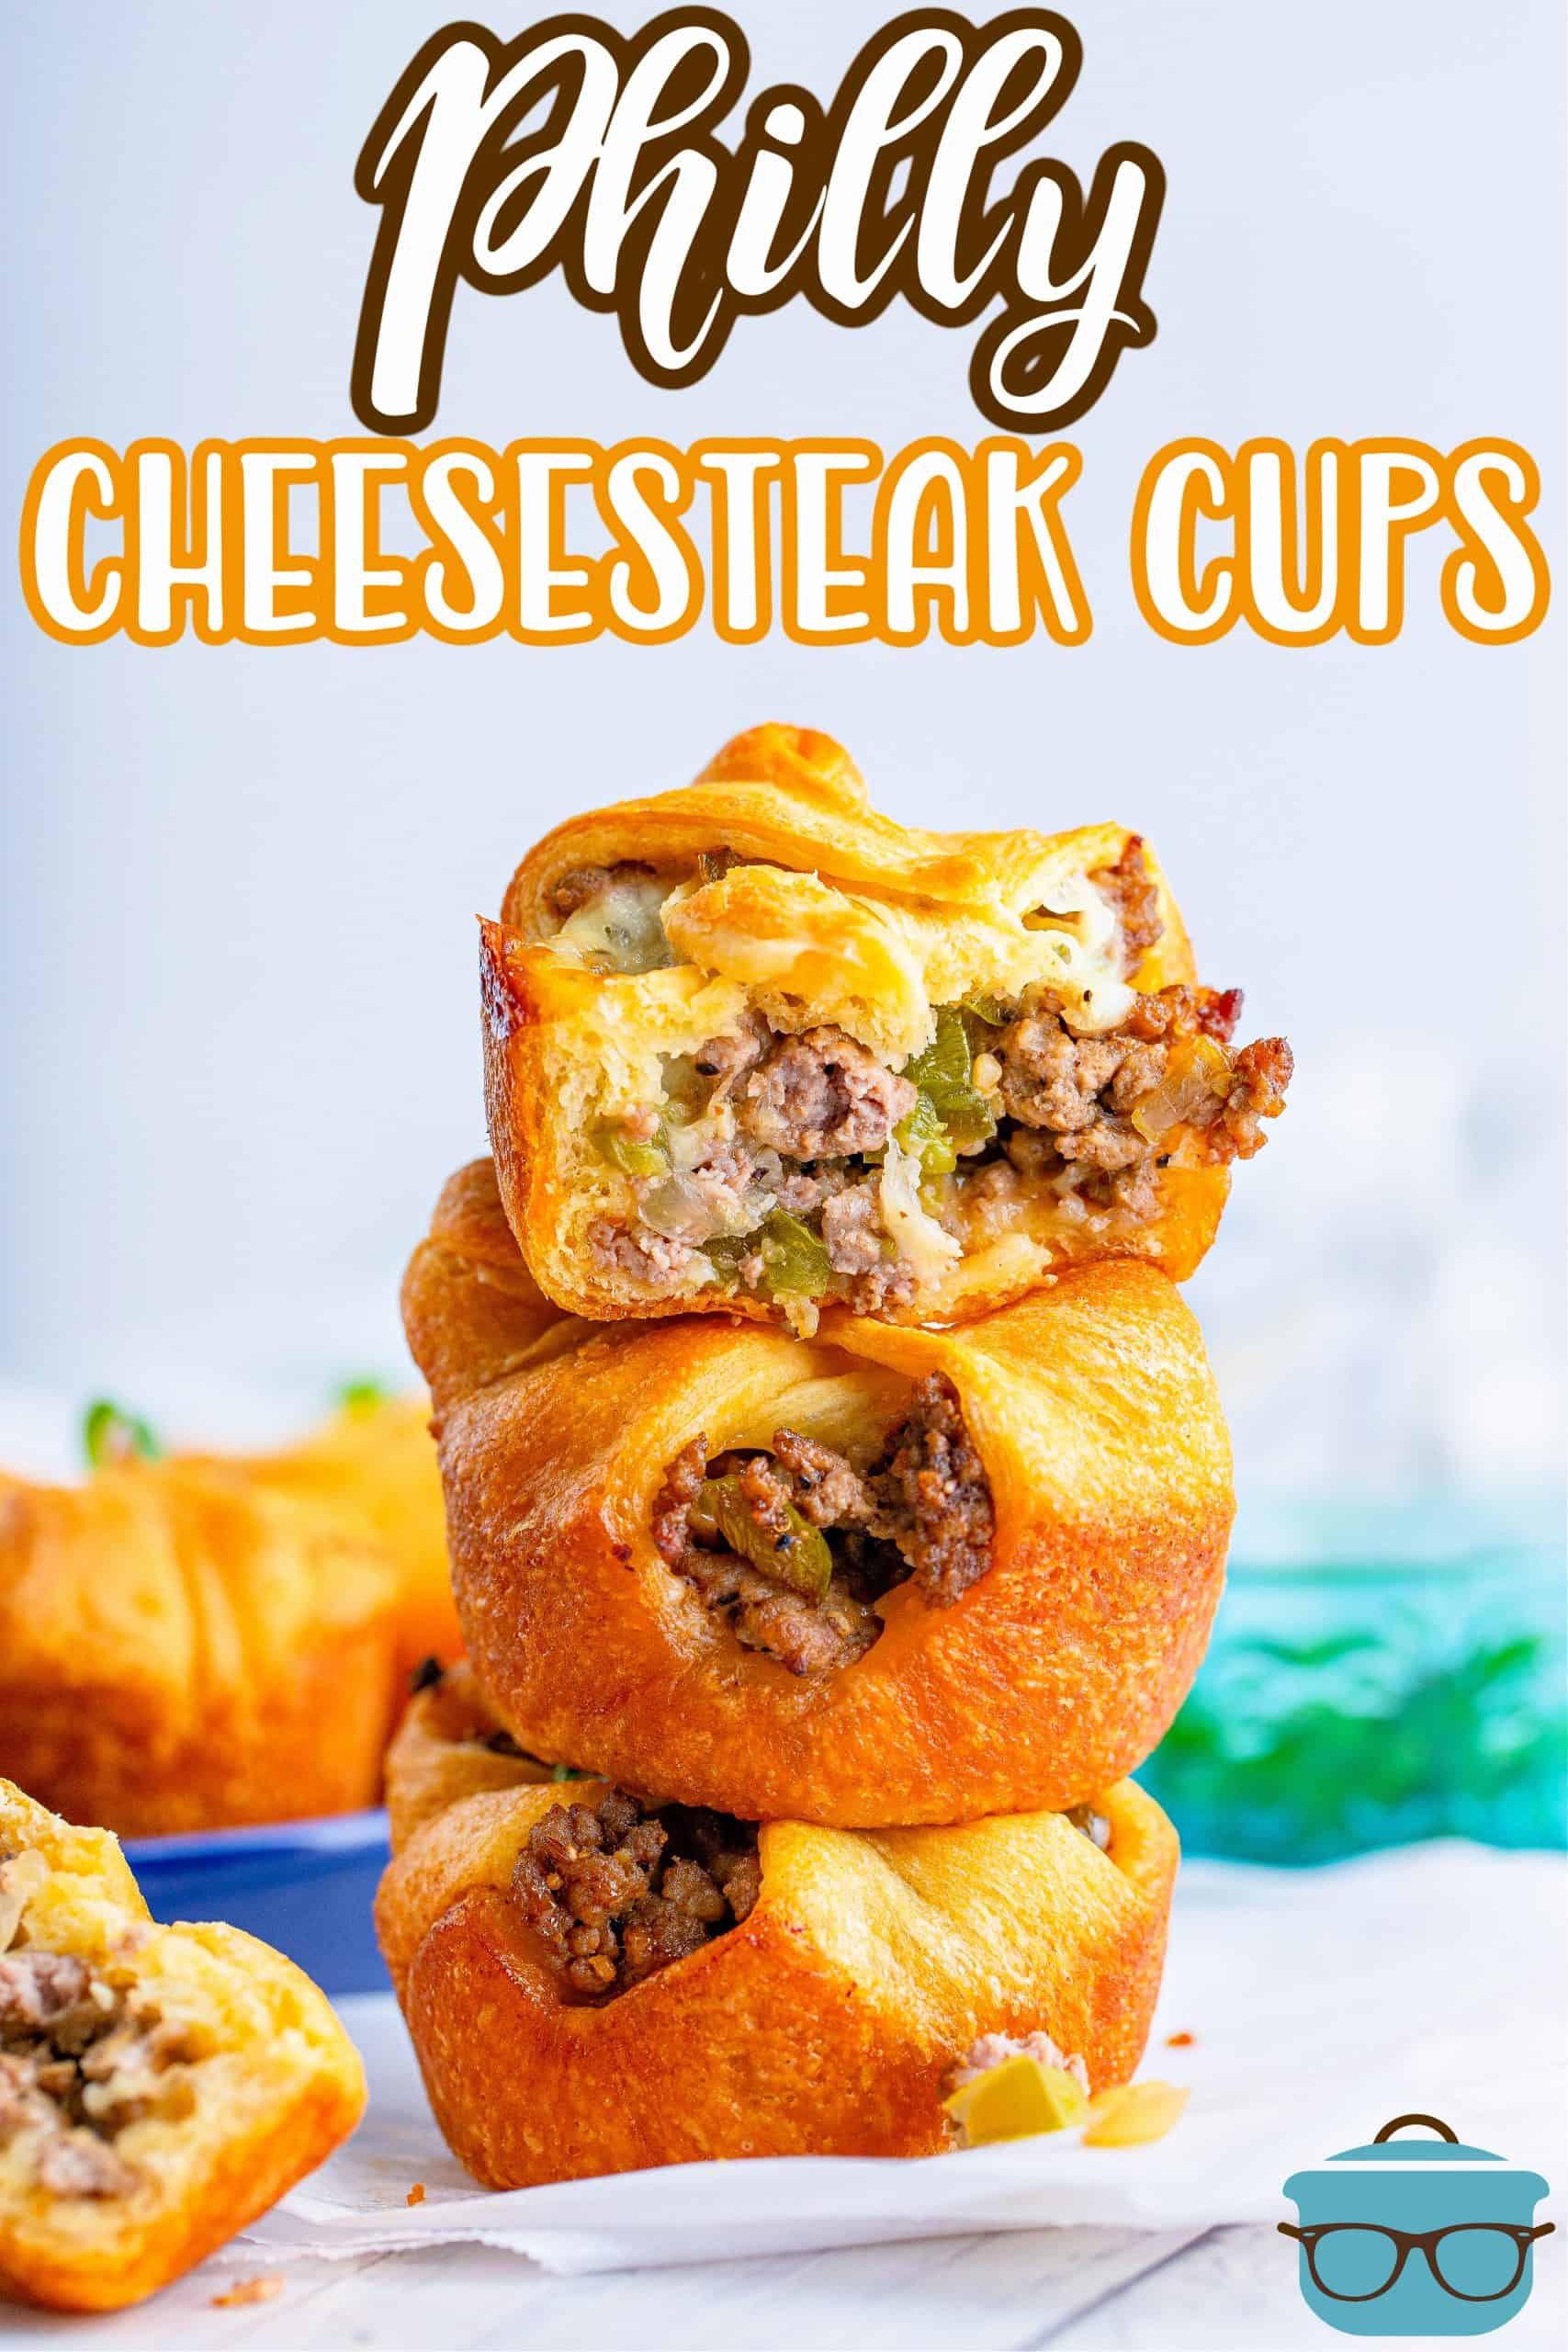 Three stacked Philly Cheesesteak Cups on a napkin.